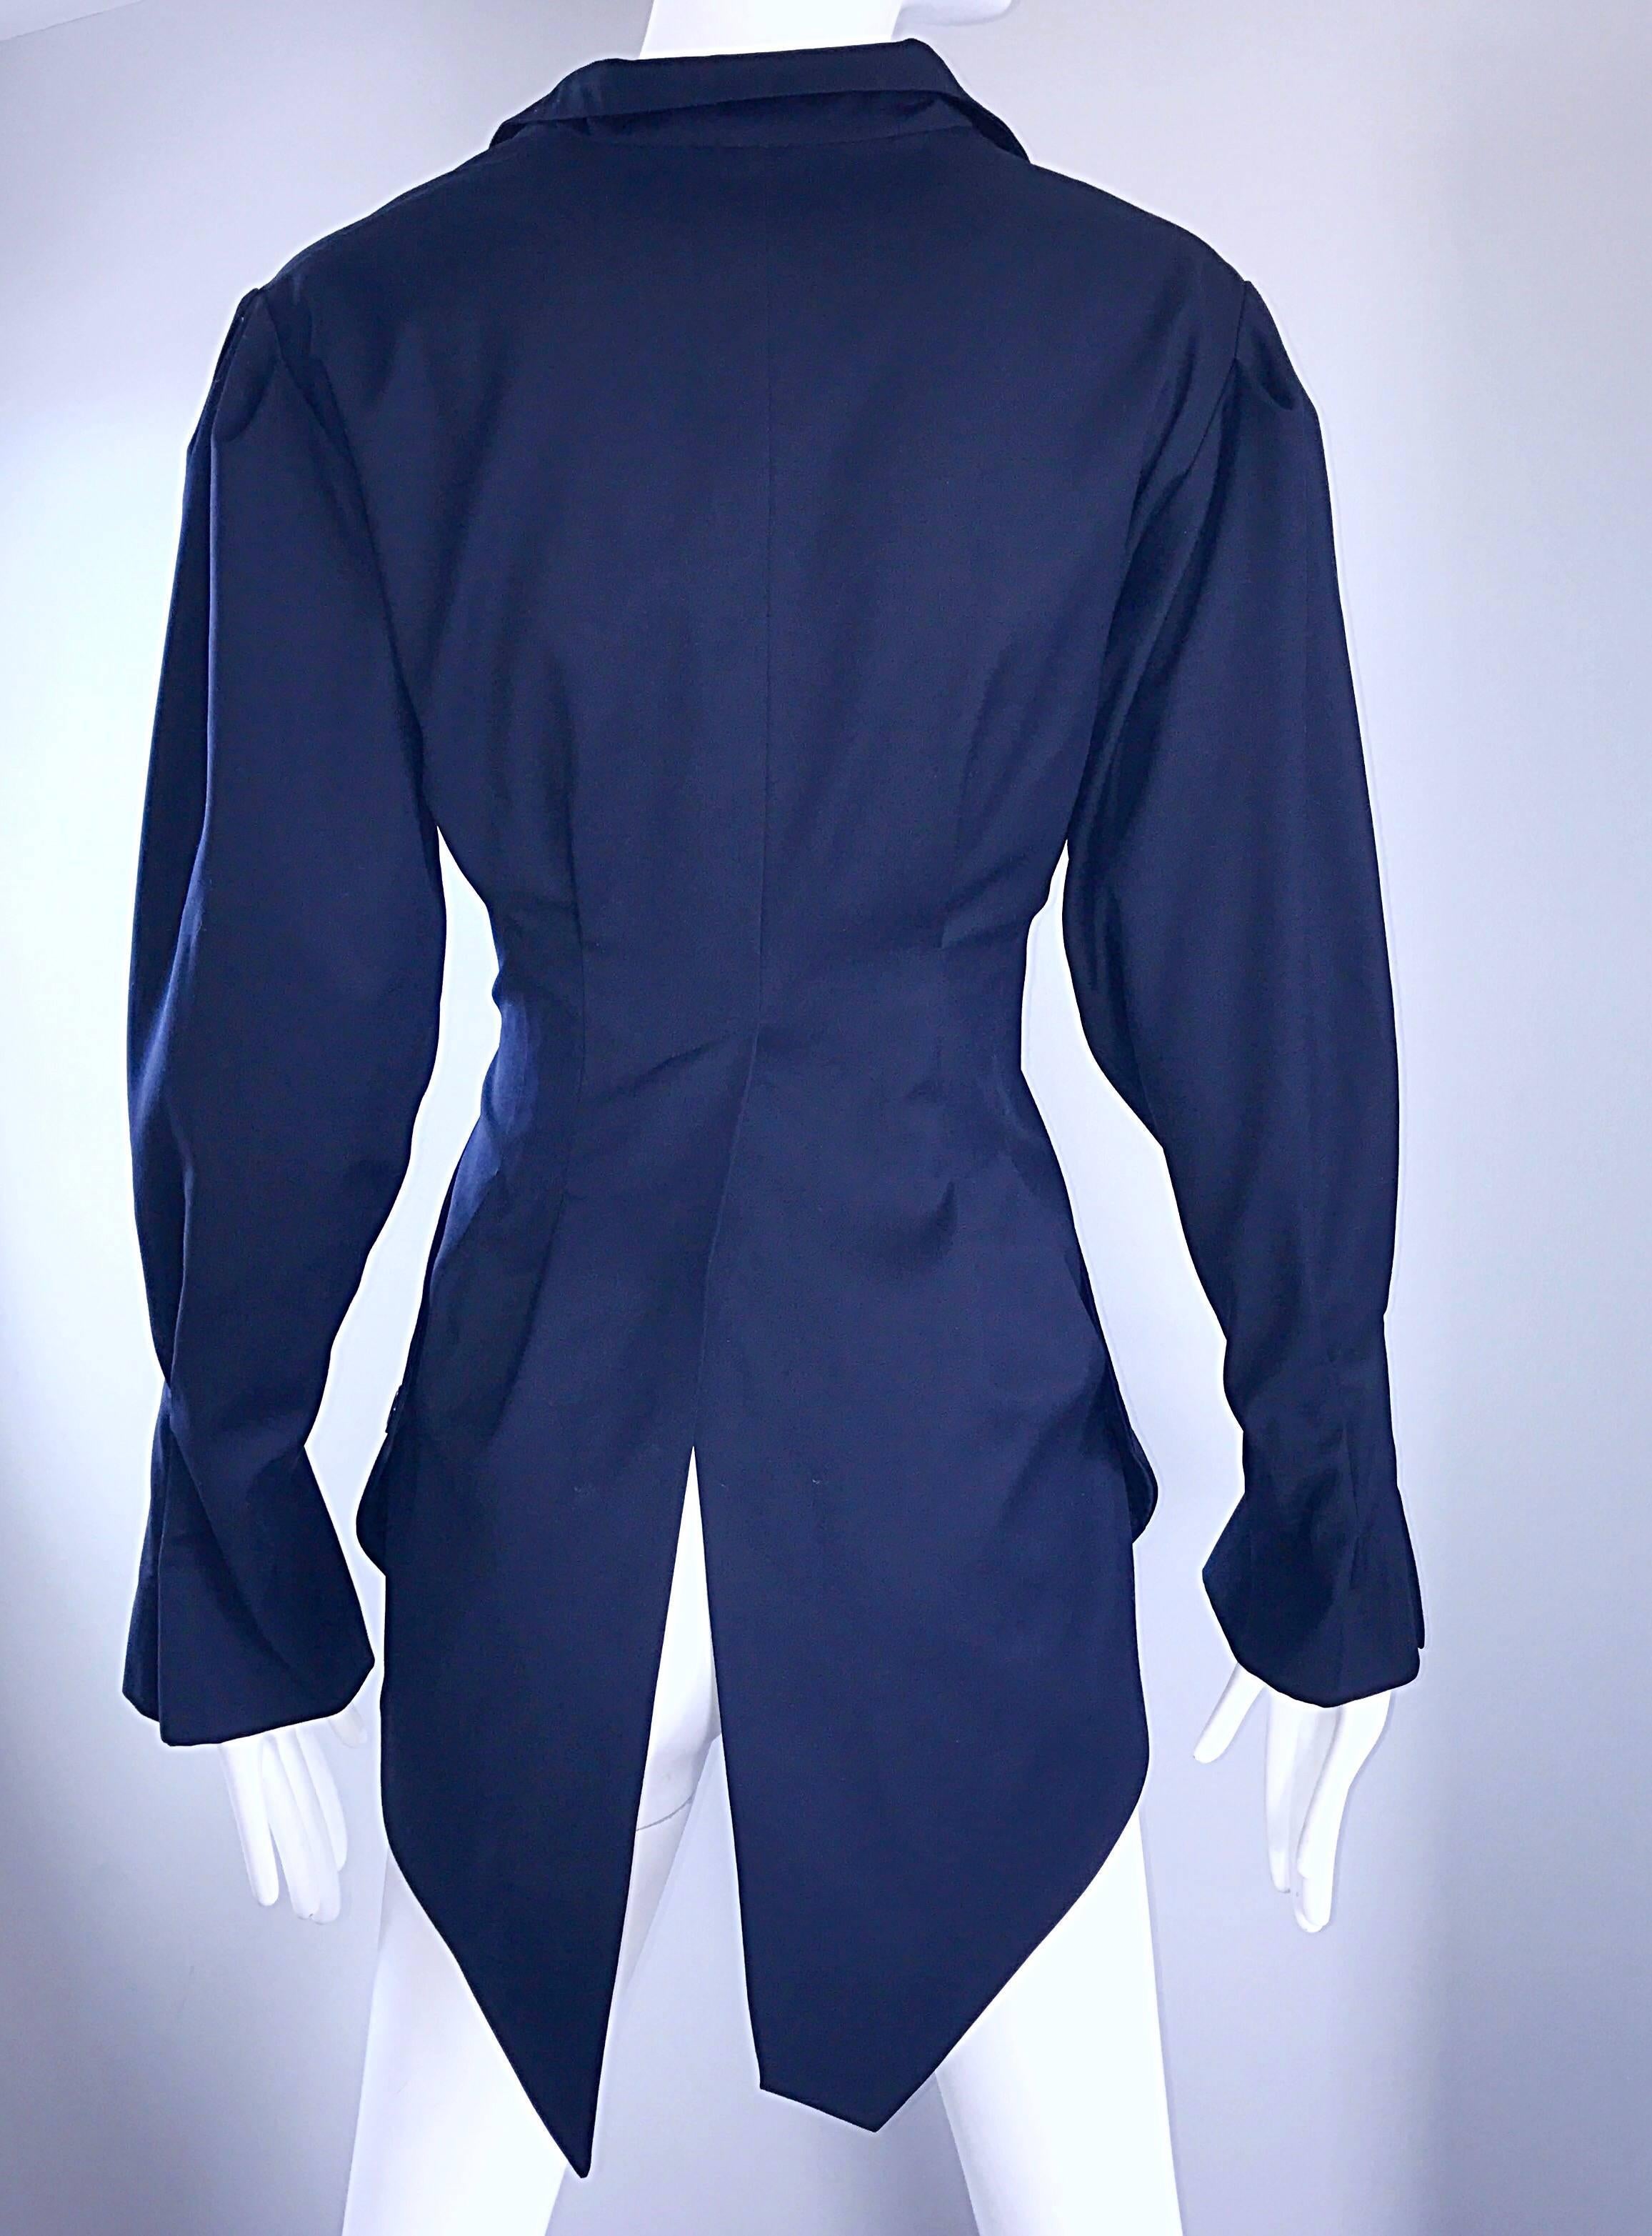 Rubin Singer Midnight Blue 2008 Avant Garde Asymmetrical Dinner Tux Tail Jacket  In Excellent Condition For Sale In San Diego, CA